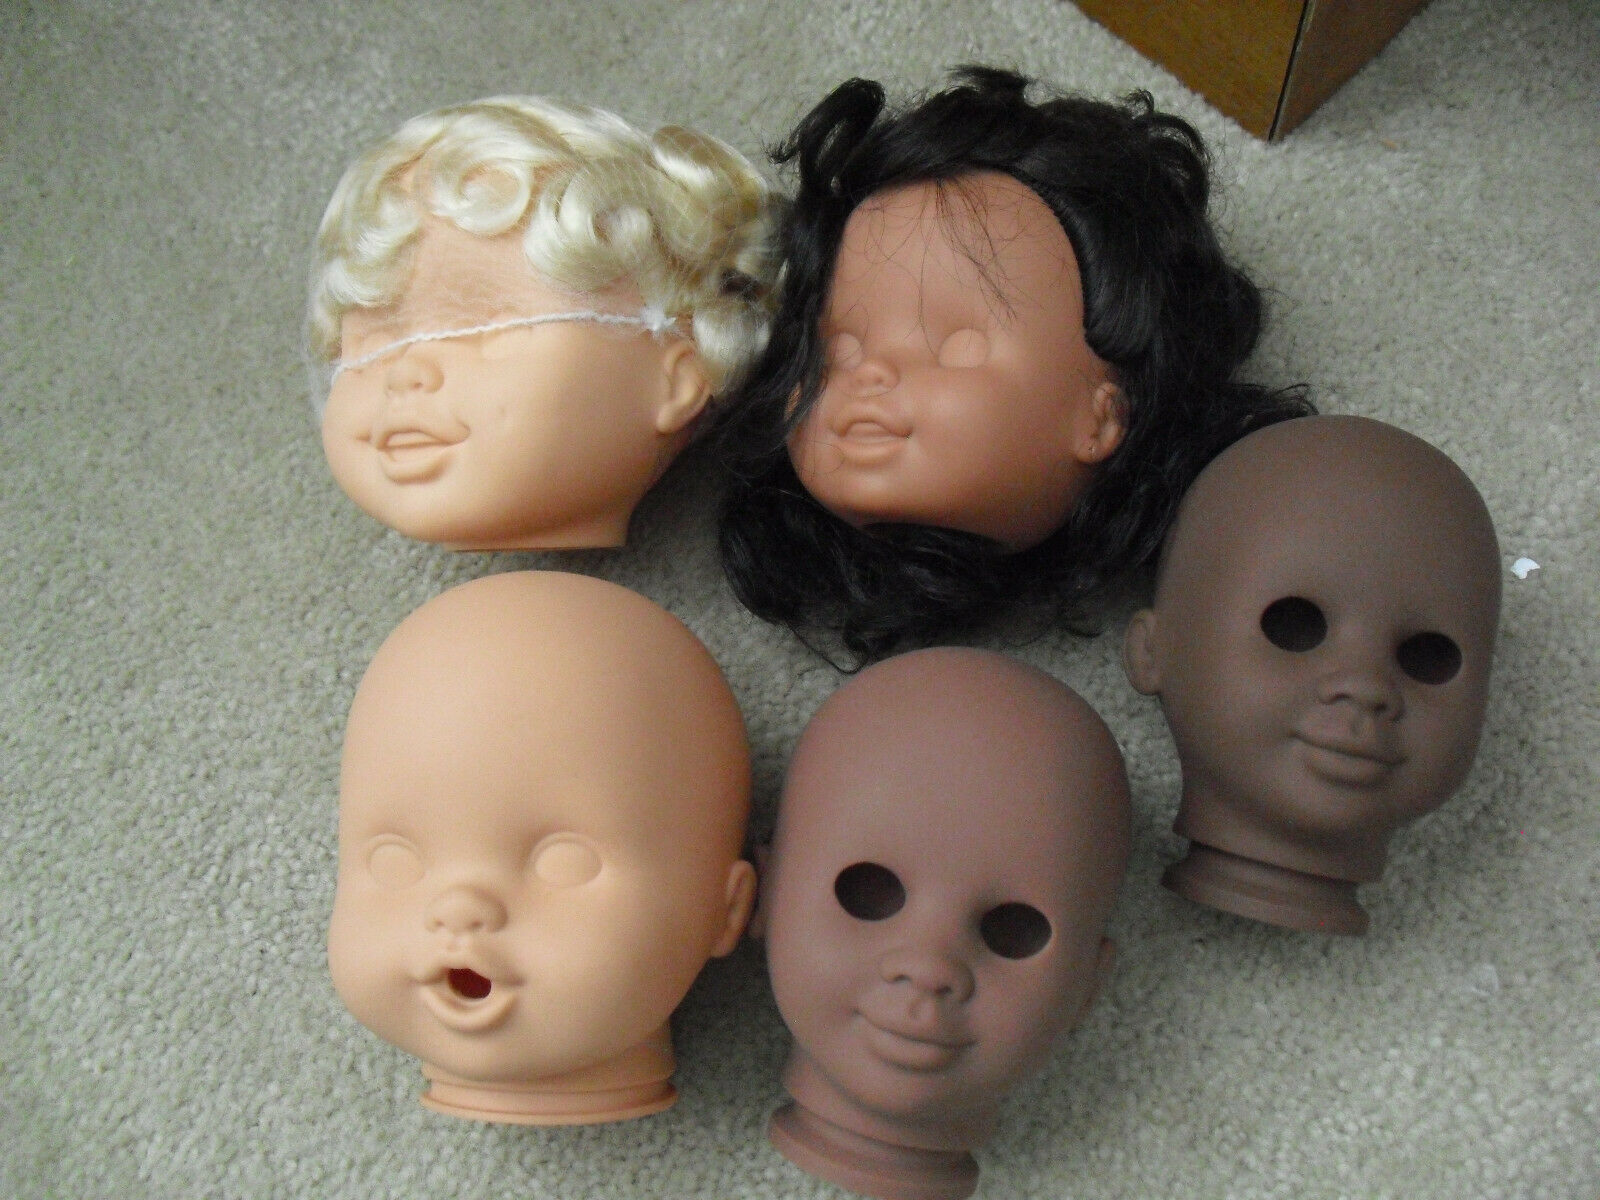 Lot of 5 1990s Tyco Vinyl Unused Factory Stock Girl Boy Doll Heads 4 1/2" Tall - $44.55